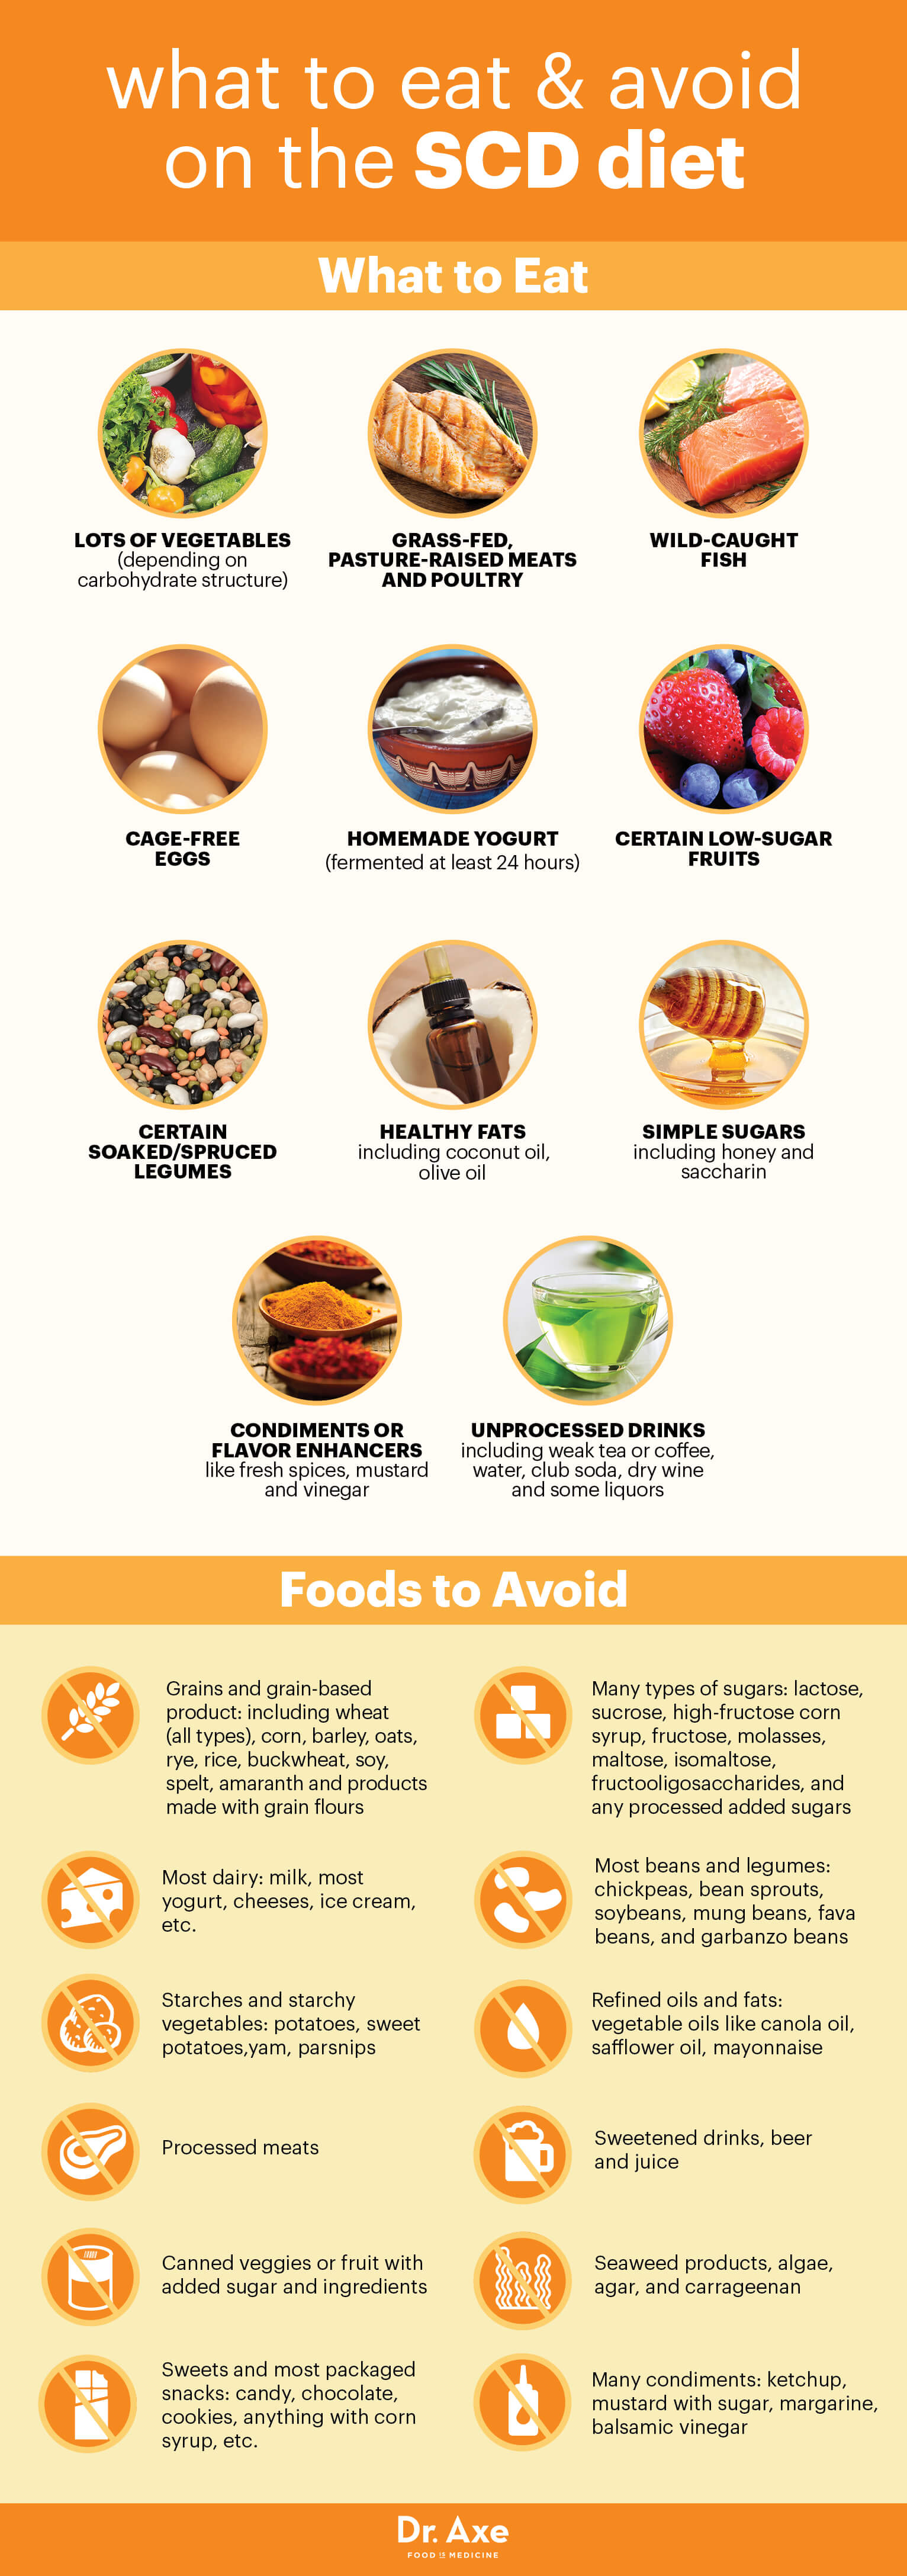 SCD diet foods to eat and avoid - Dr. Axe